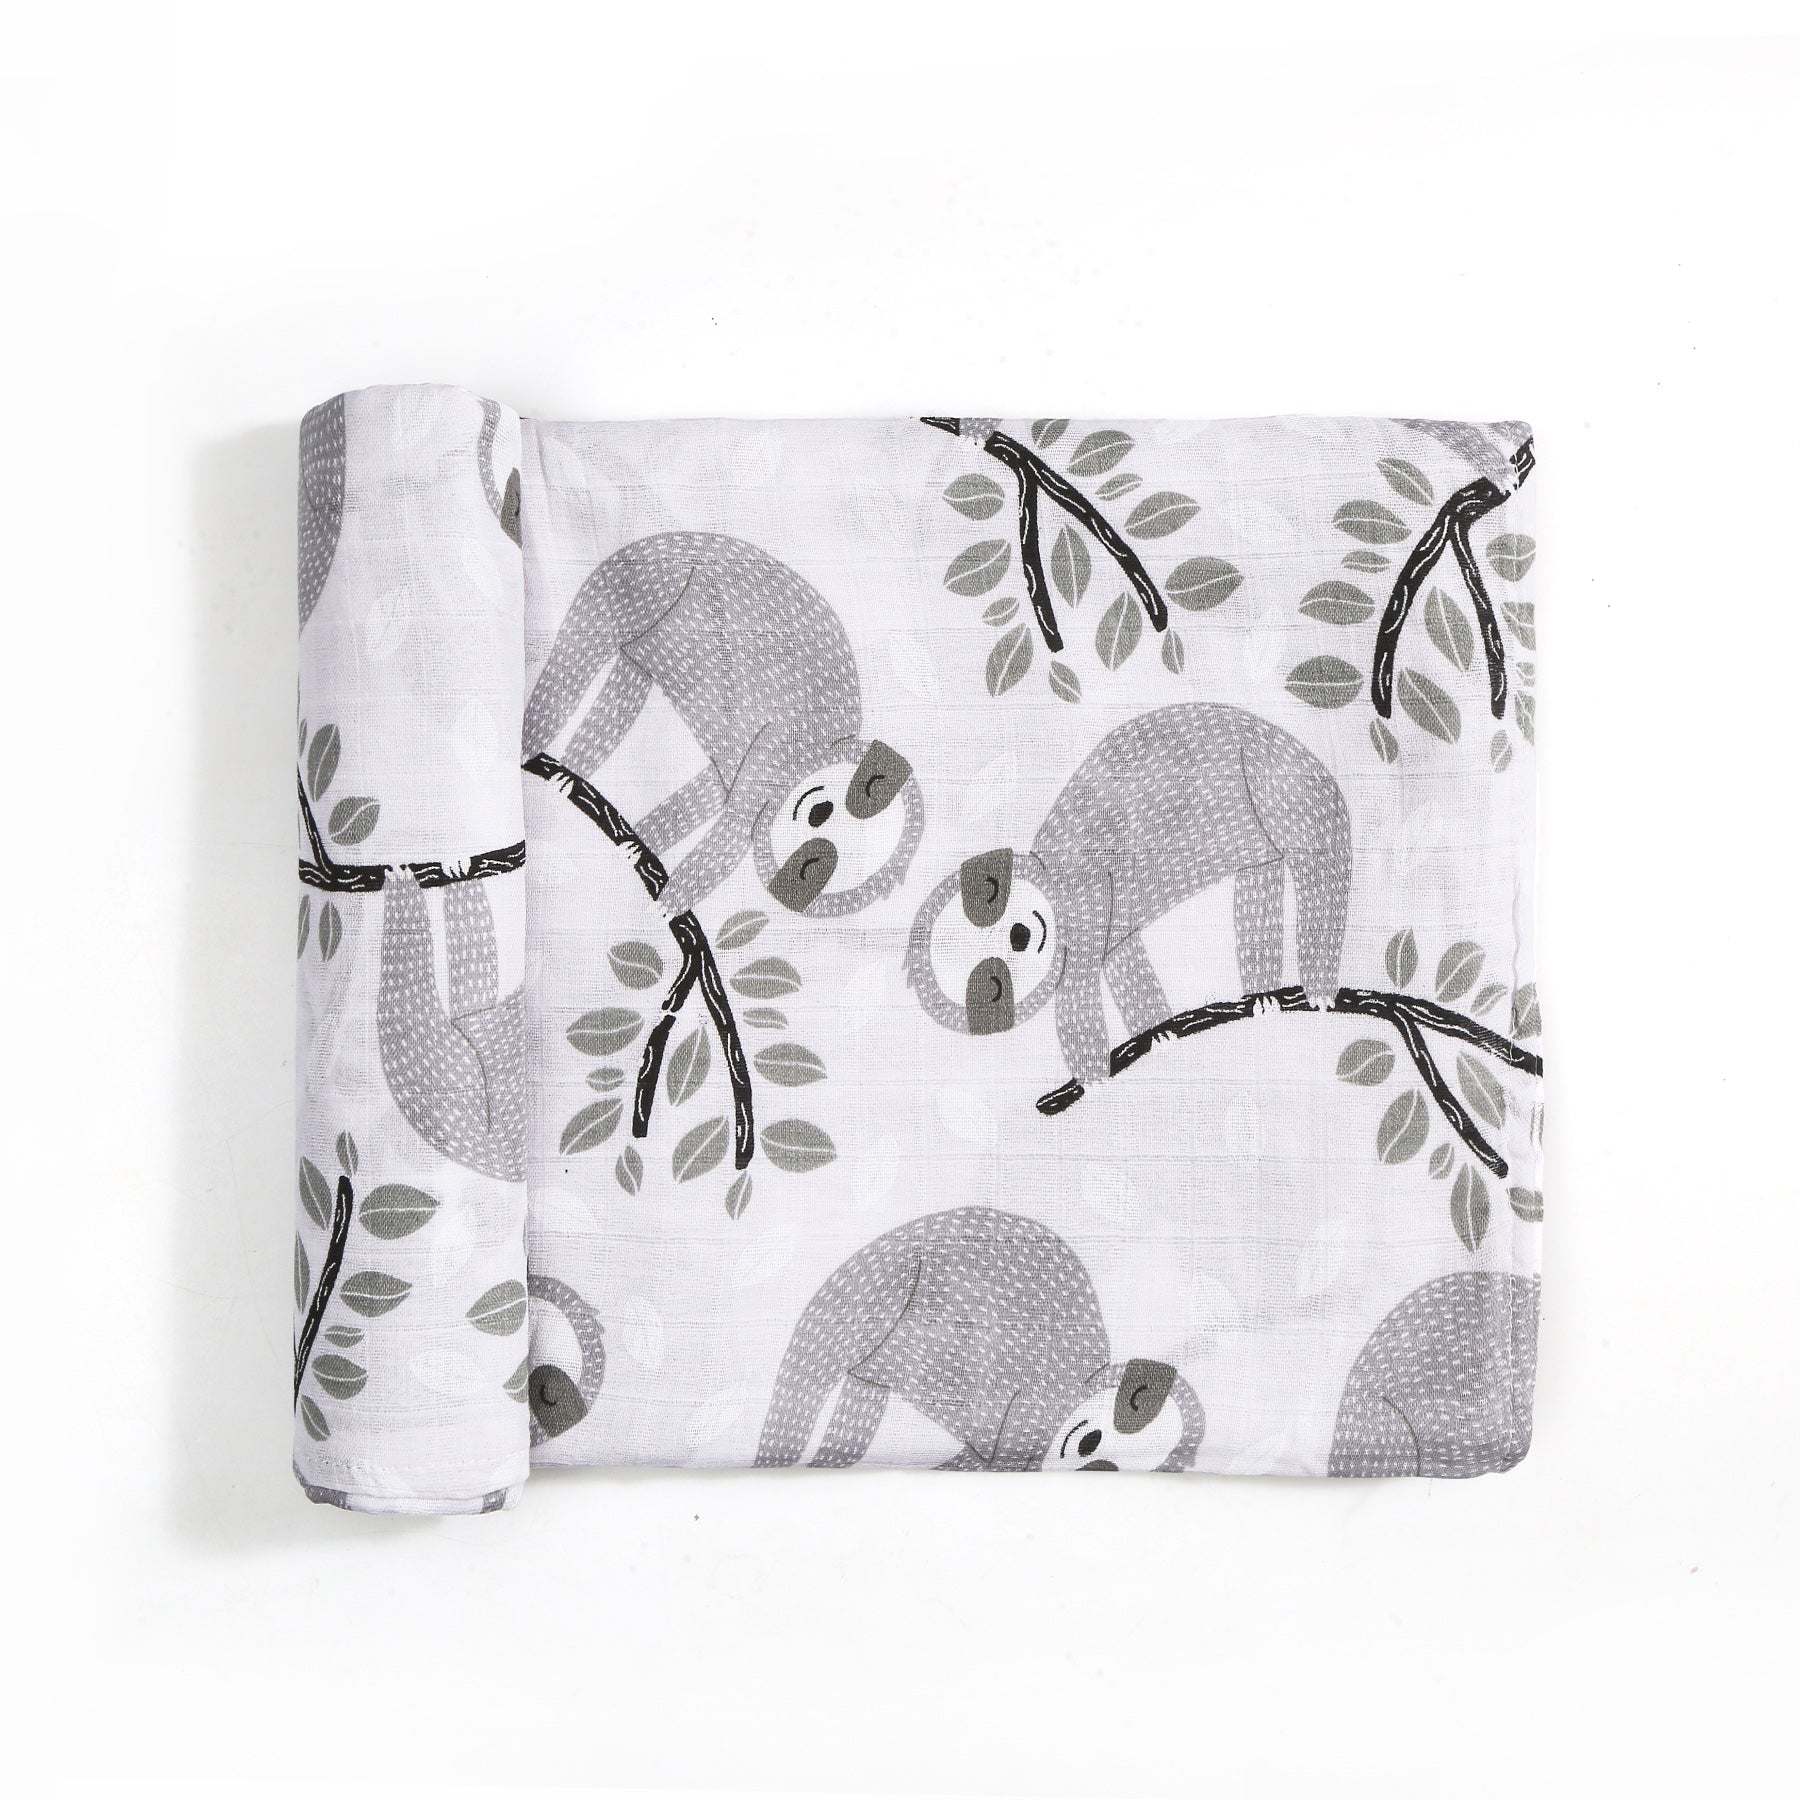 Sleepy Sloth Swaddle - Baby Swaddles & Wraps at Louie Meets Lola